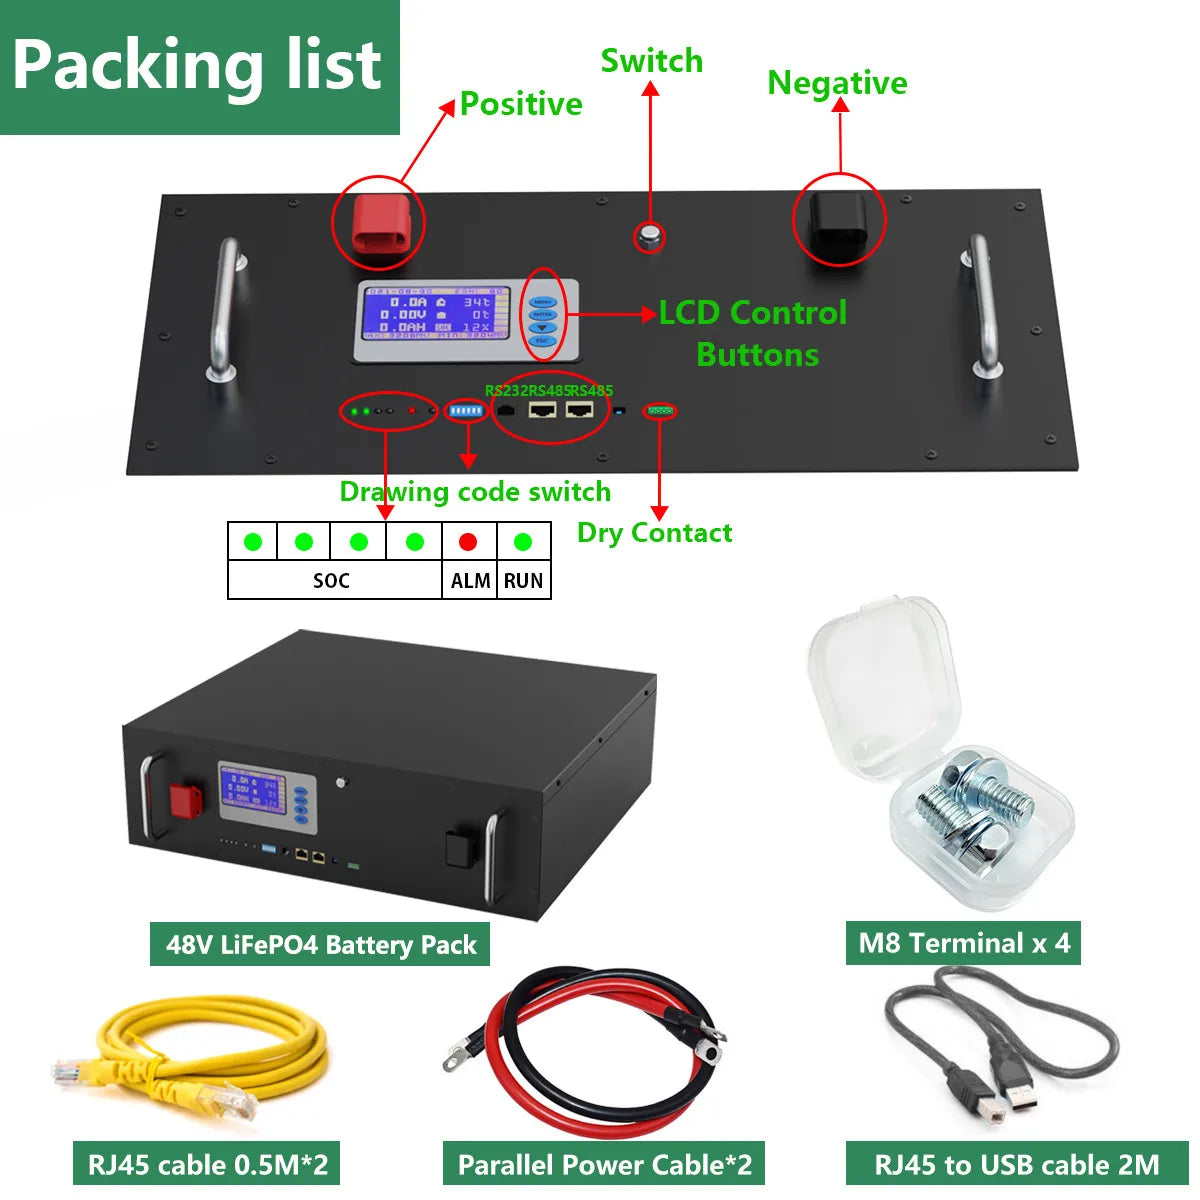 LiFePO4 48V 100AH Battery, Packaging includes electrical components, battery pack, and cables.